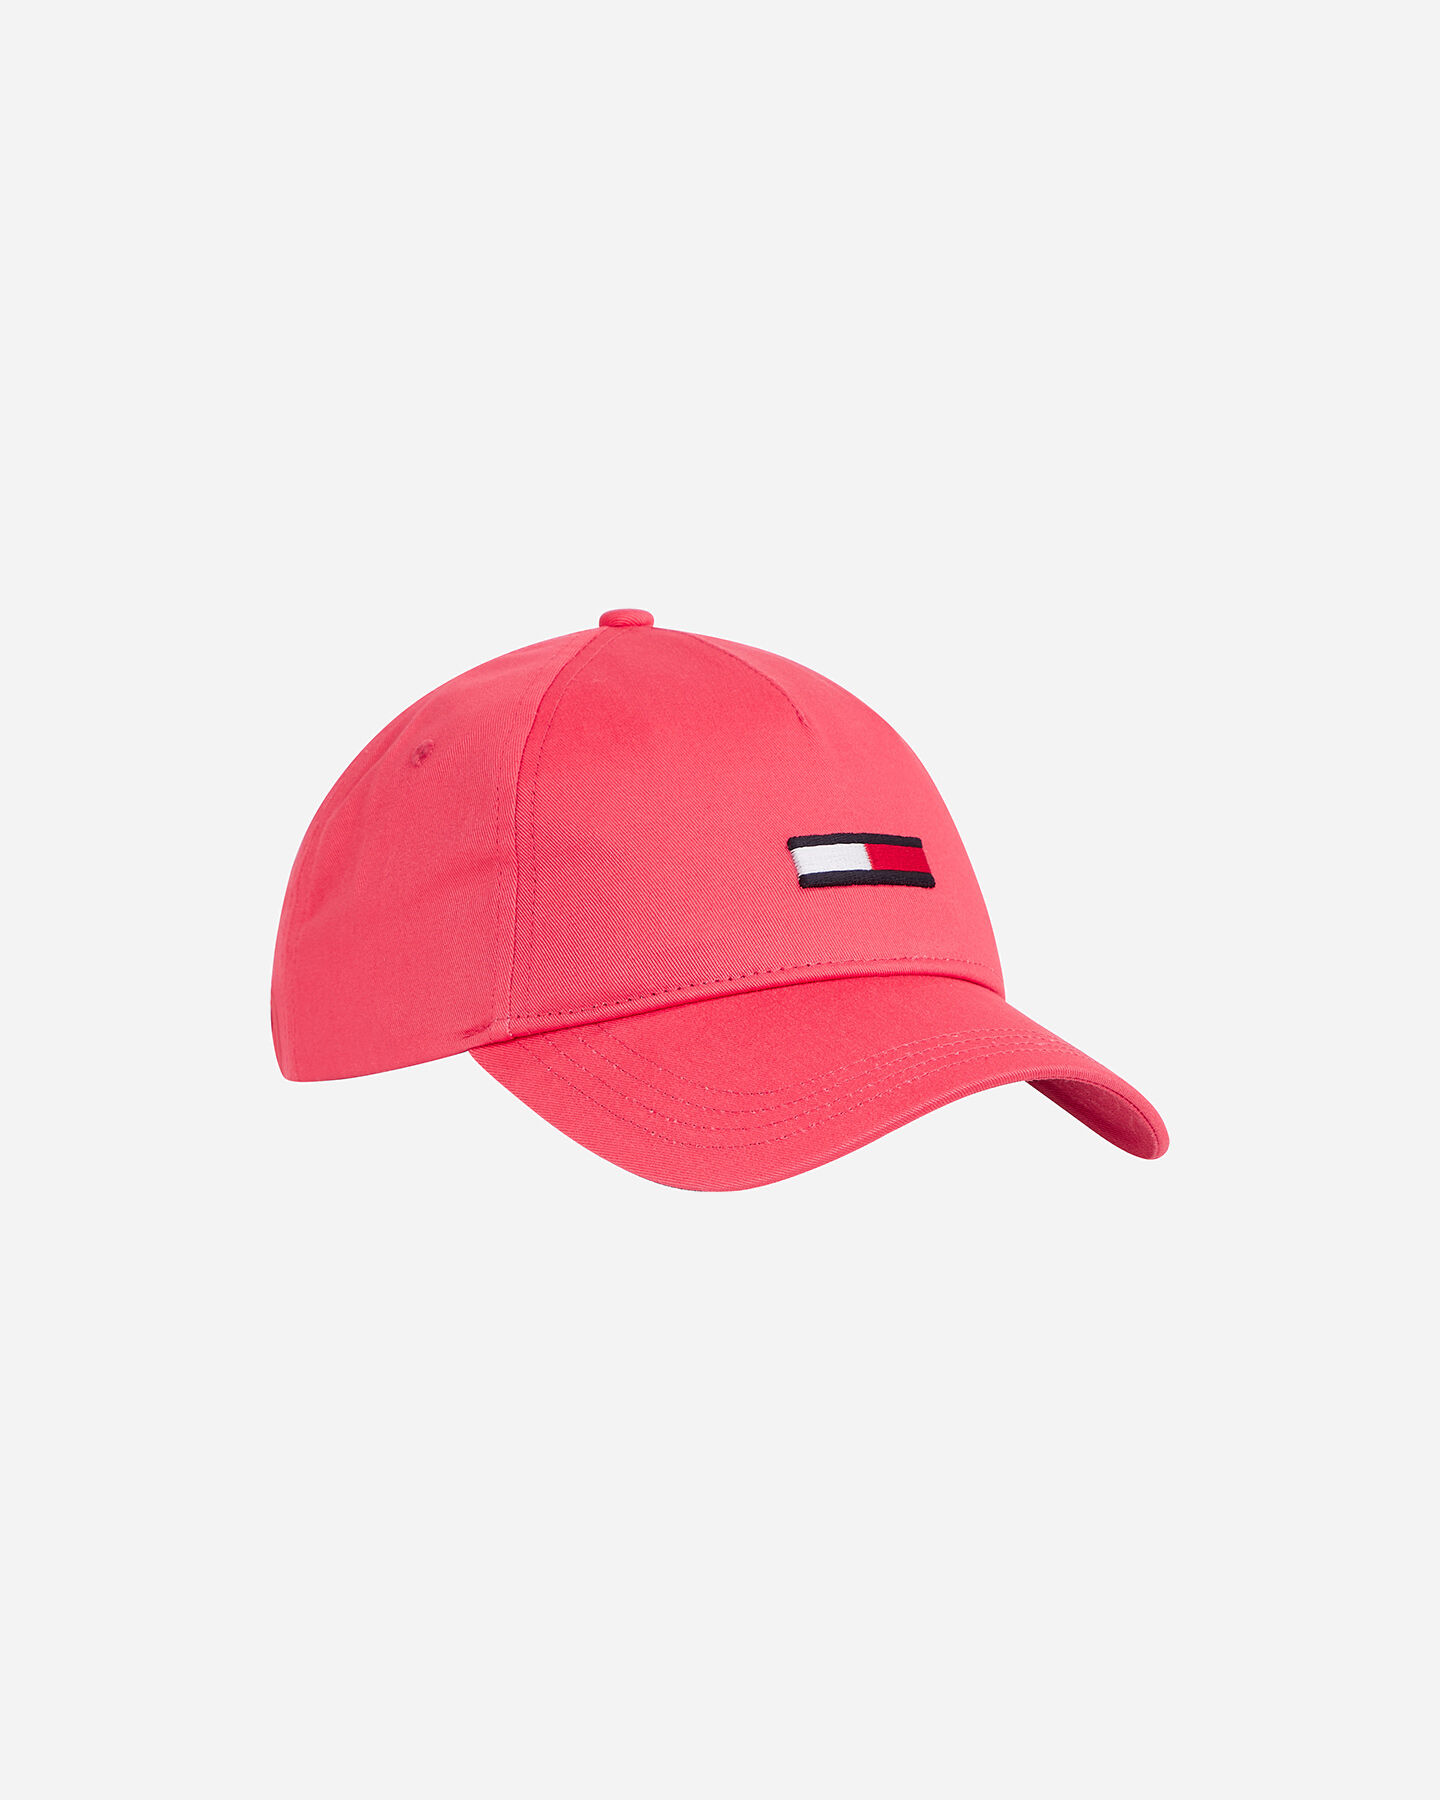  Cappellino TOMMY HILFIGER FLAG W S4122960|TJN|OS scatto 0